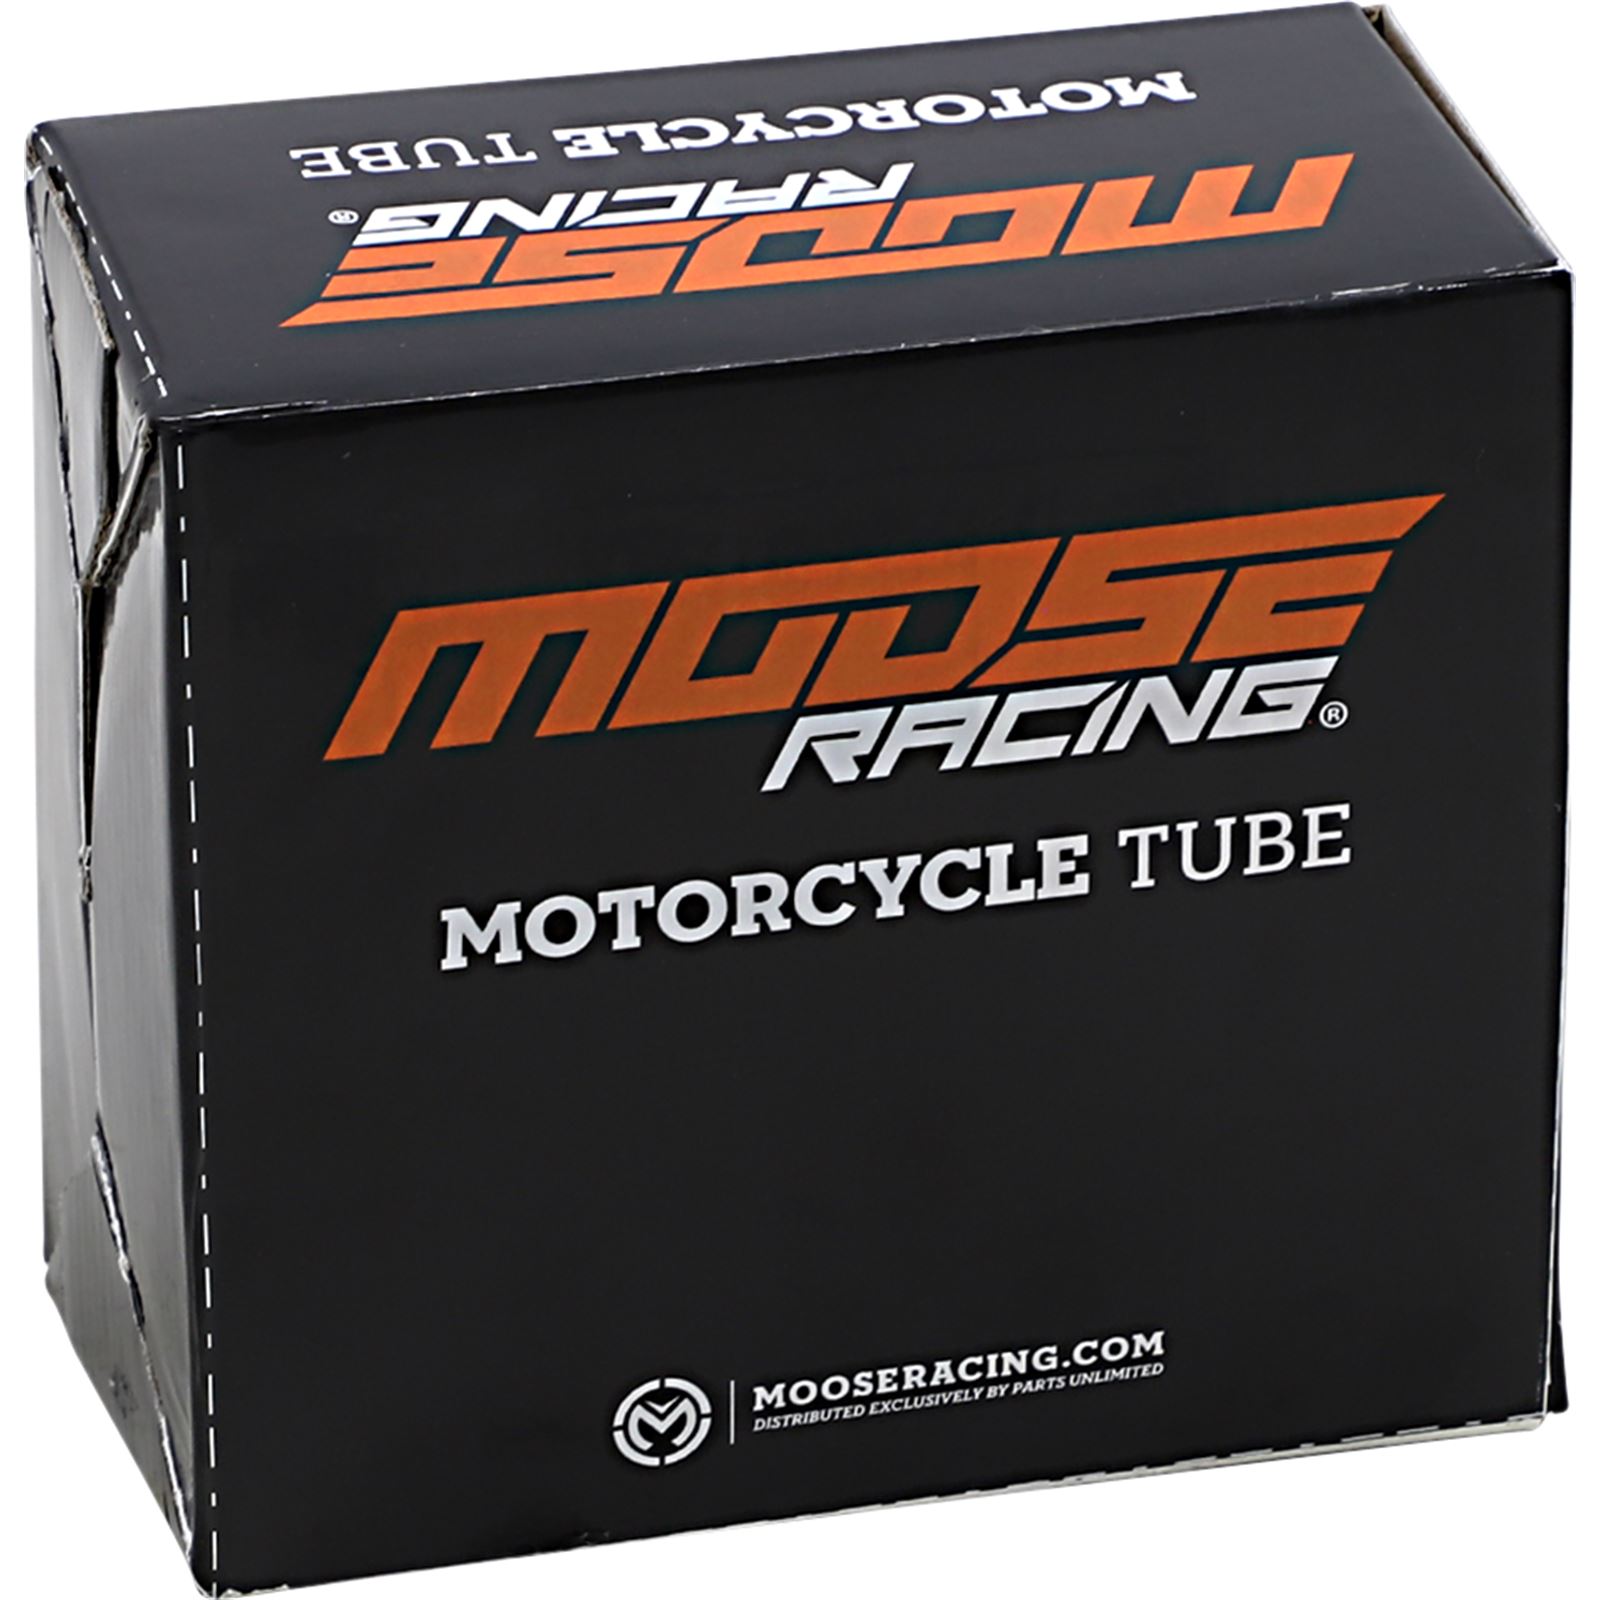 Moose Racing | Purchase Moose Racing Parts & Products from the